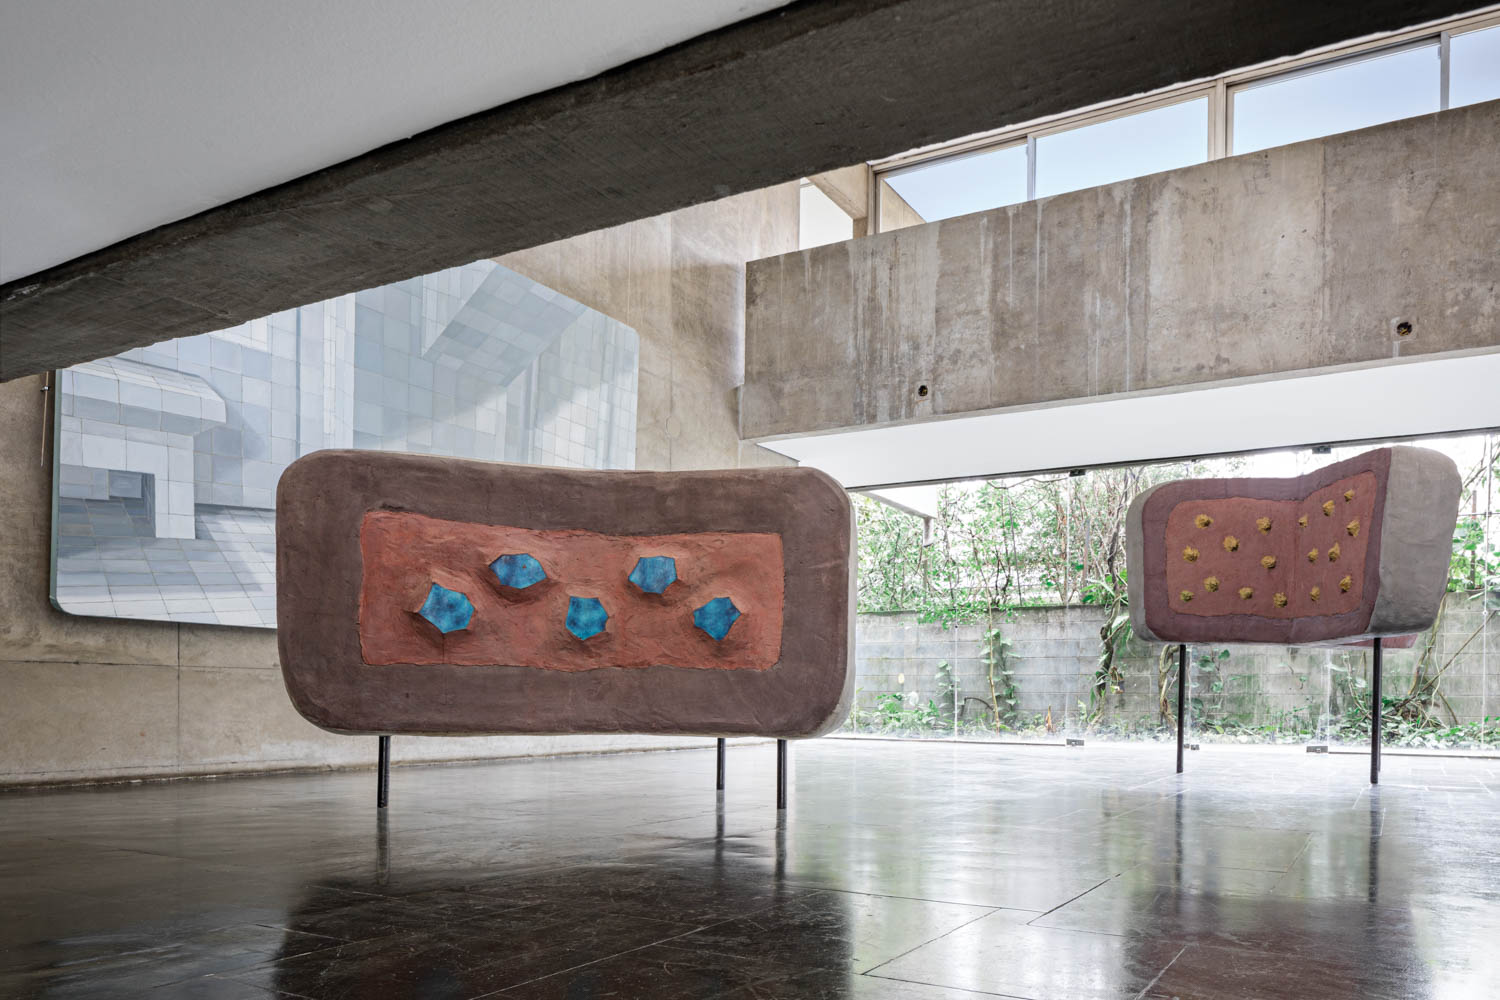 concrete-based sculptures at this home/gallery